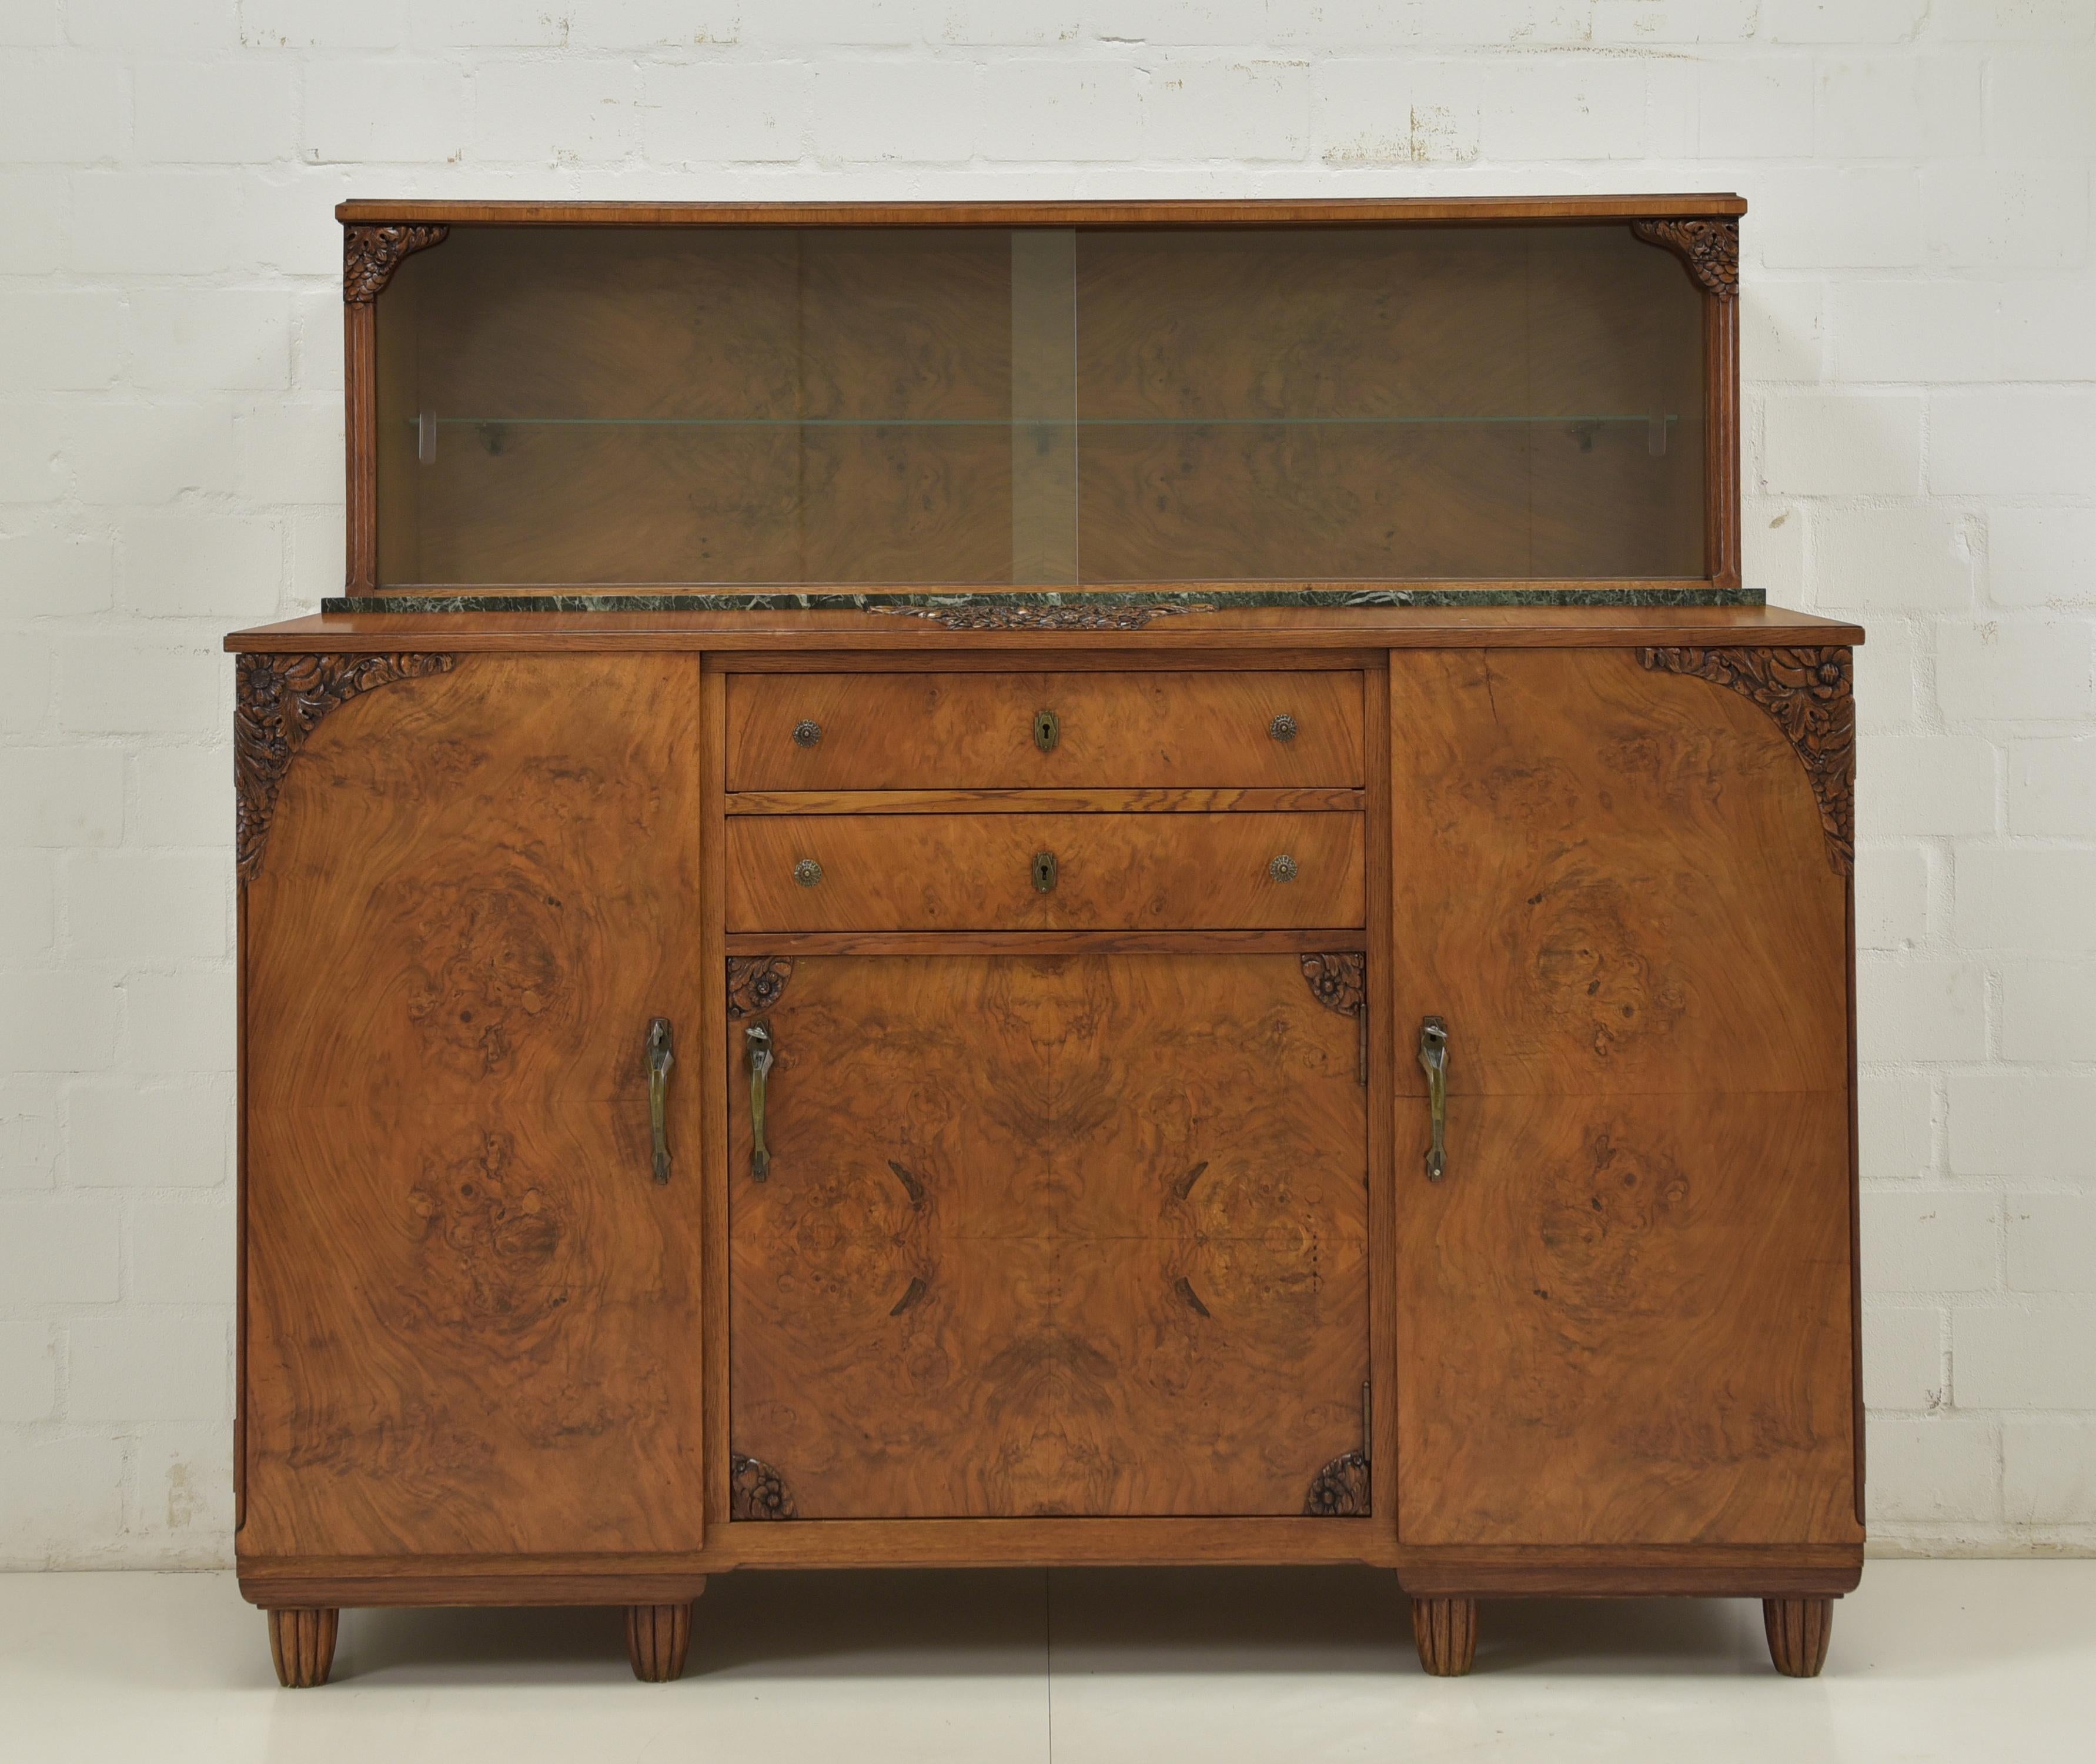 This elegant Art Deco sideboard with glass top is a timeless piece of furniture from around 1925. It is in very good condition and has a high-quality finish.


The sideboard is made of walnut veneer with an oak frame. The base has three doors and